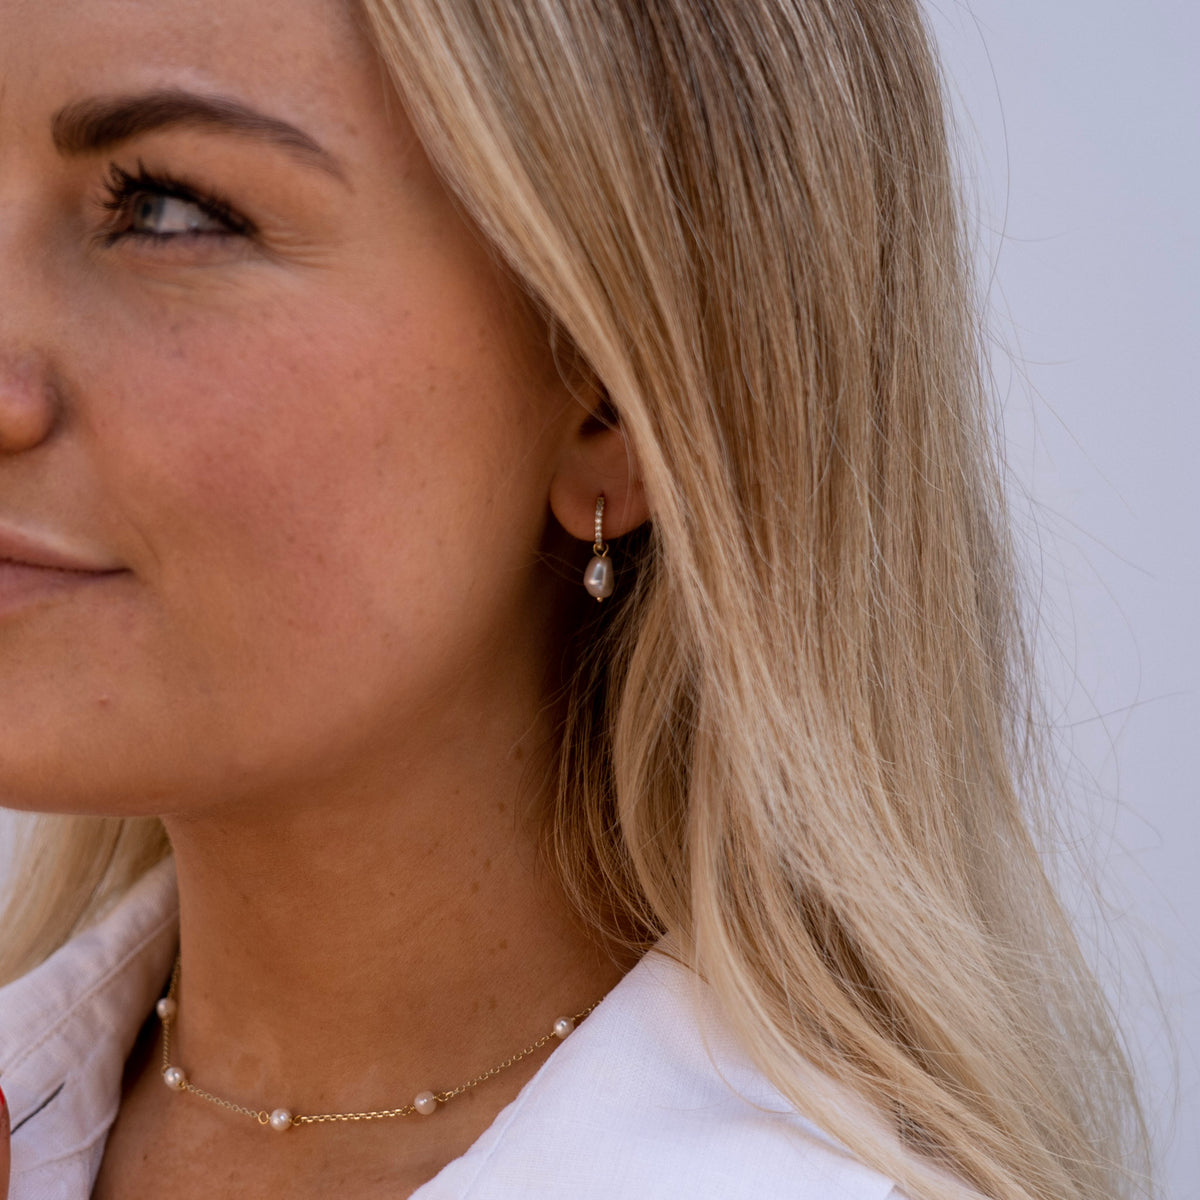 The lady is wearing the Genteel Hoop Earrings and the Panicle Necklace. The pearl earrings have a detachable pearl charm. The charm hangs on an embellished huggy band. The necklace contains beautiful pearls on a gold chain. This is perfect for a gift. 